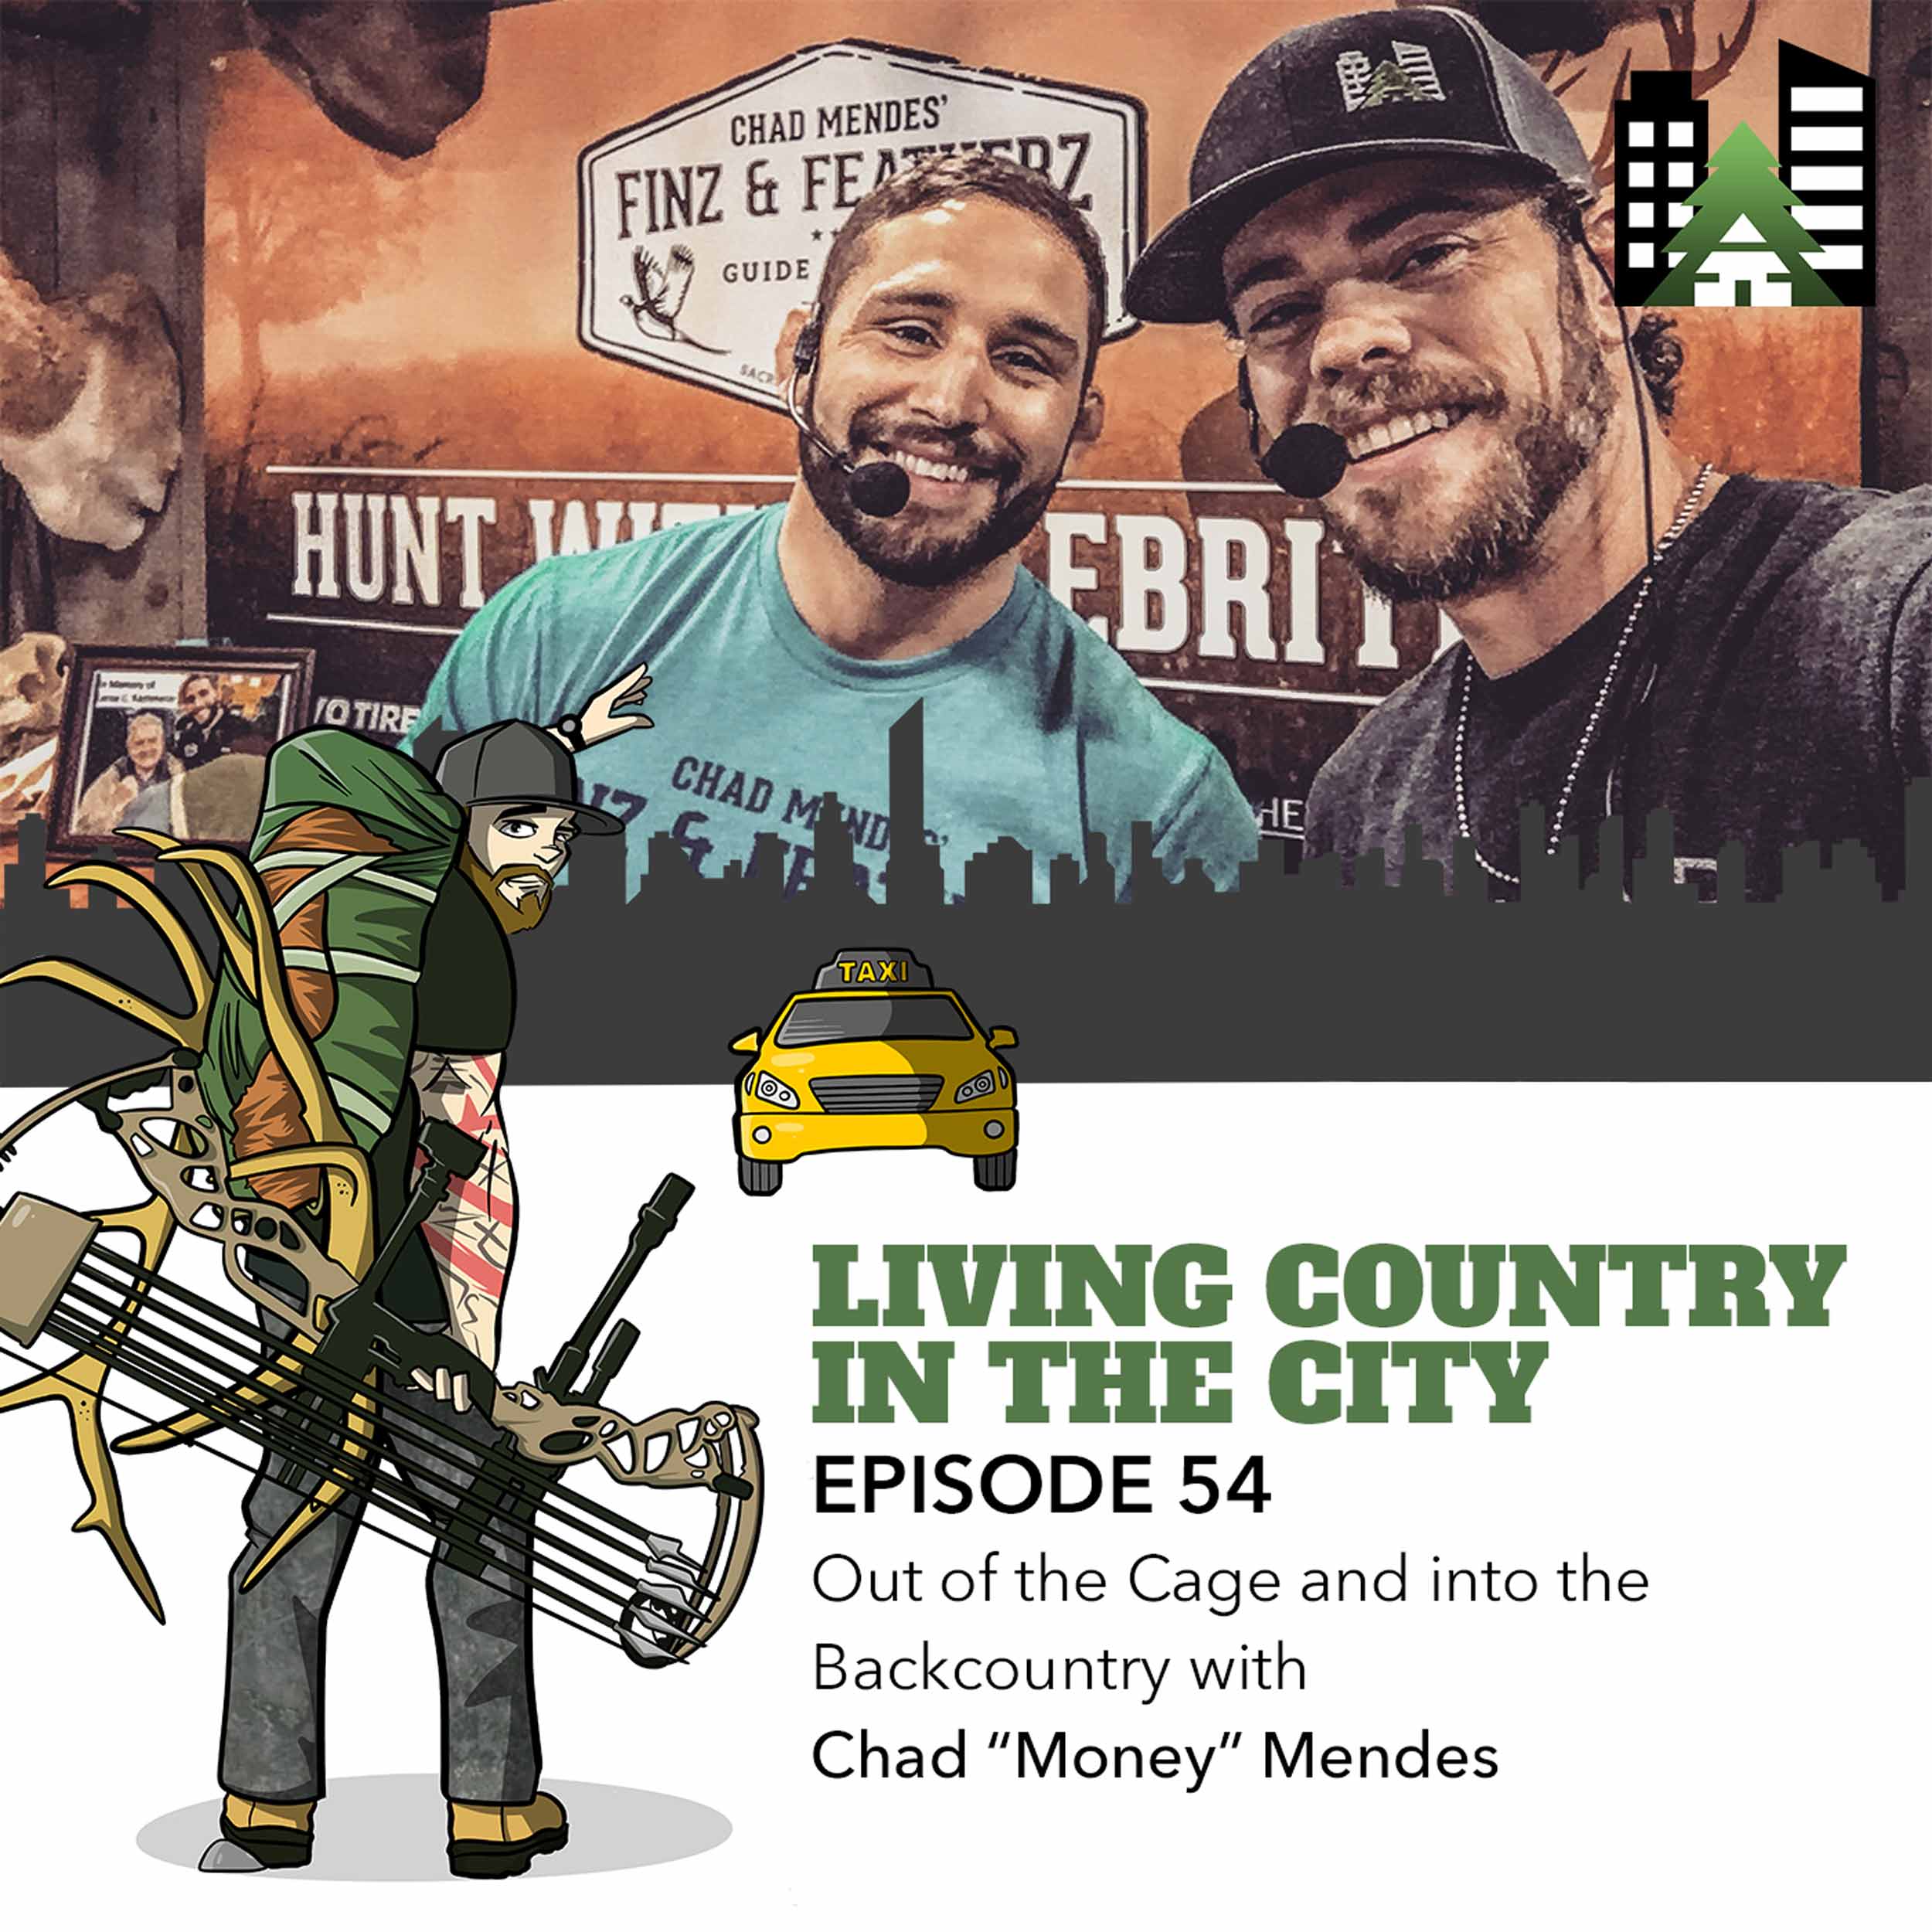 Ep 54 - Out of the Cage and Into the Backcountry with Chad ”Money” Mendes